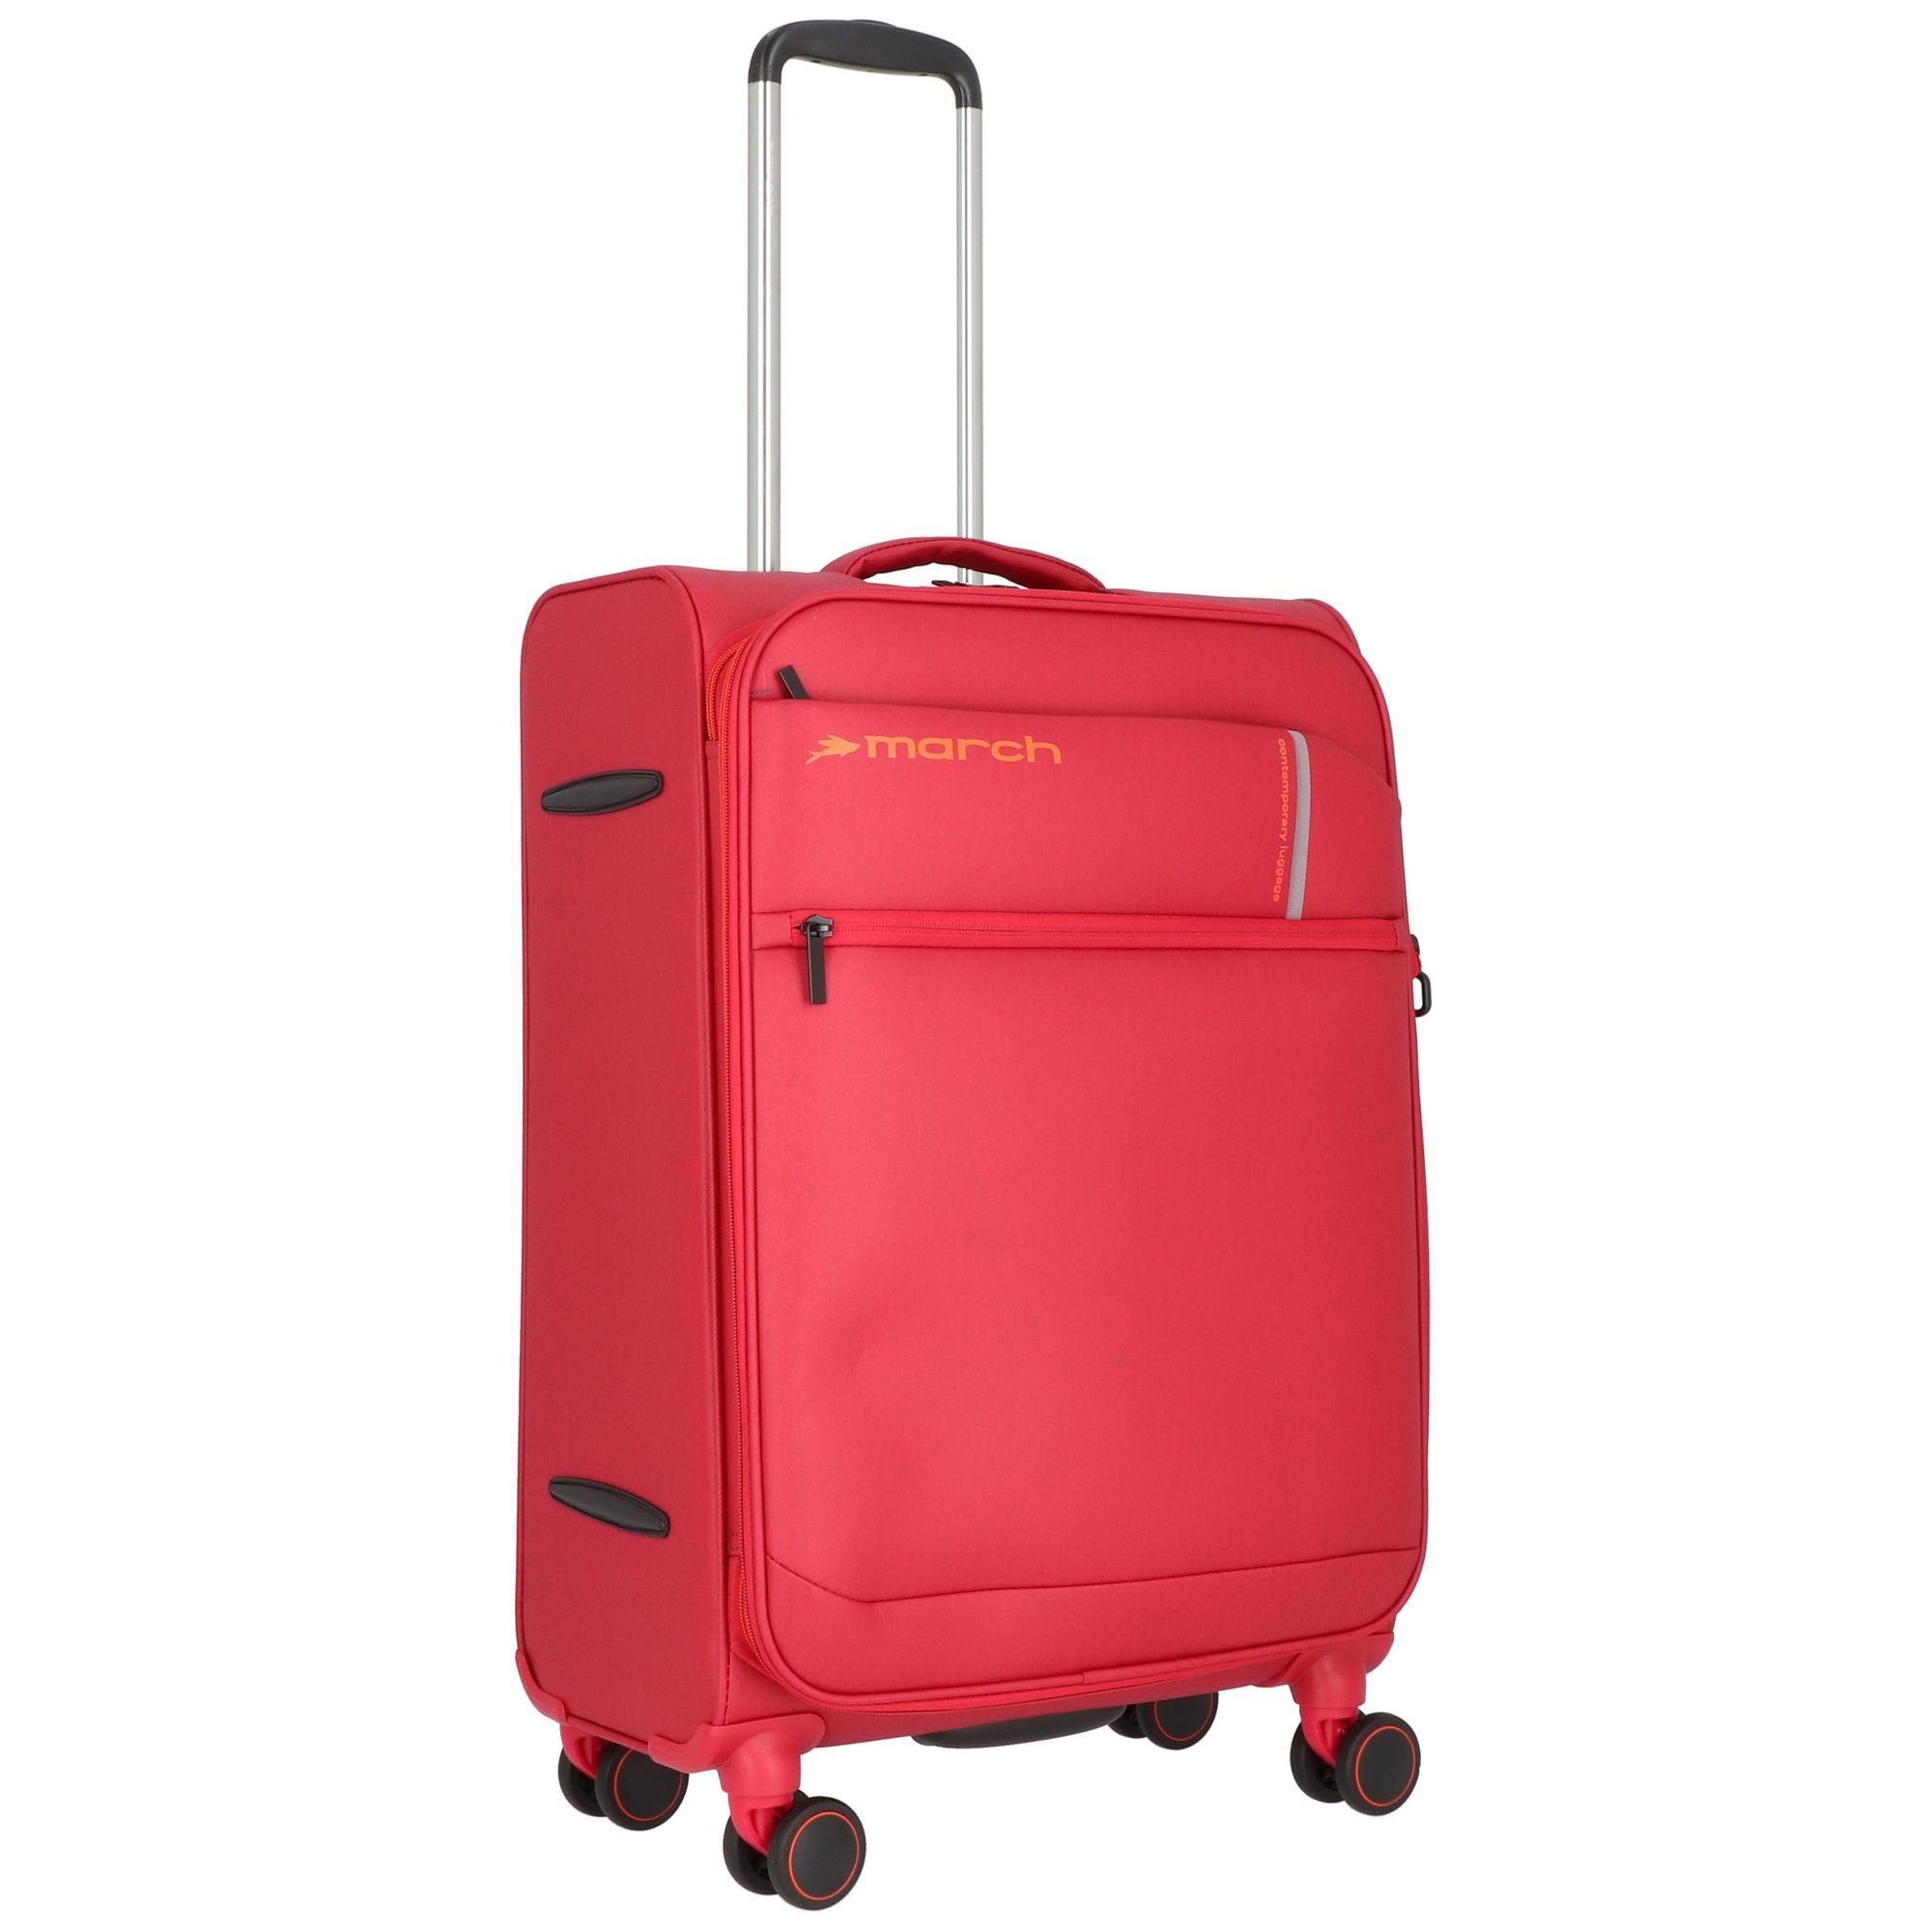 March15 Trading Trolleyset (3-teilig, tlg), Polyester Silhouette, 4 Rollen, red 3